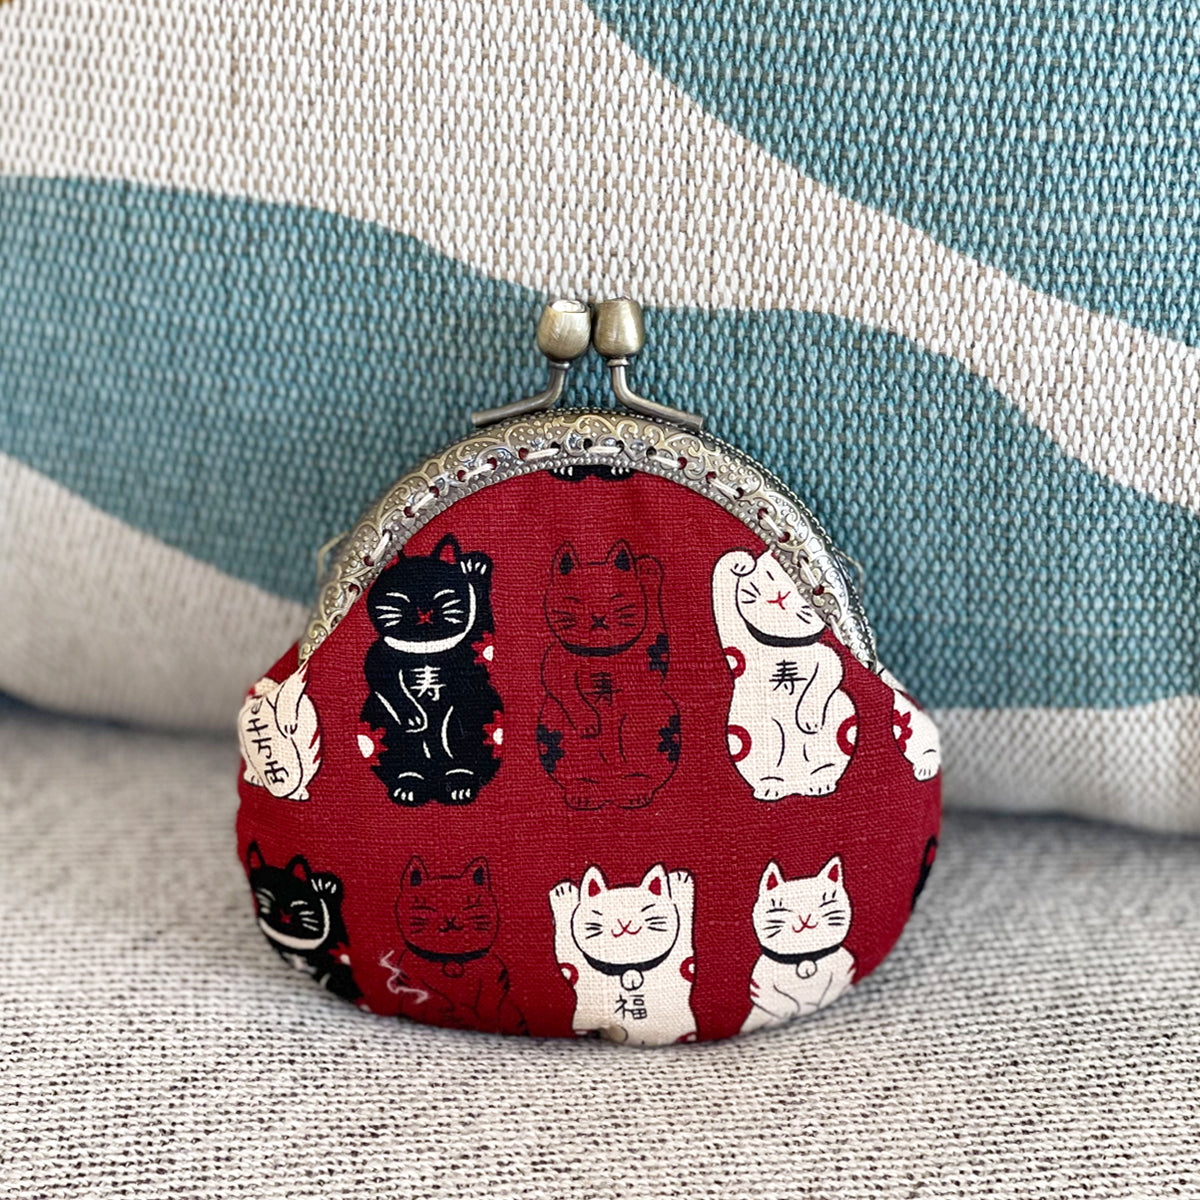 Lucky Cat Small Coin Purse, Two colors in stock - Georgia's Gifts